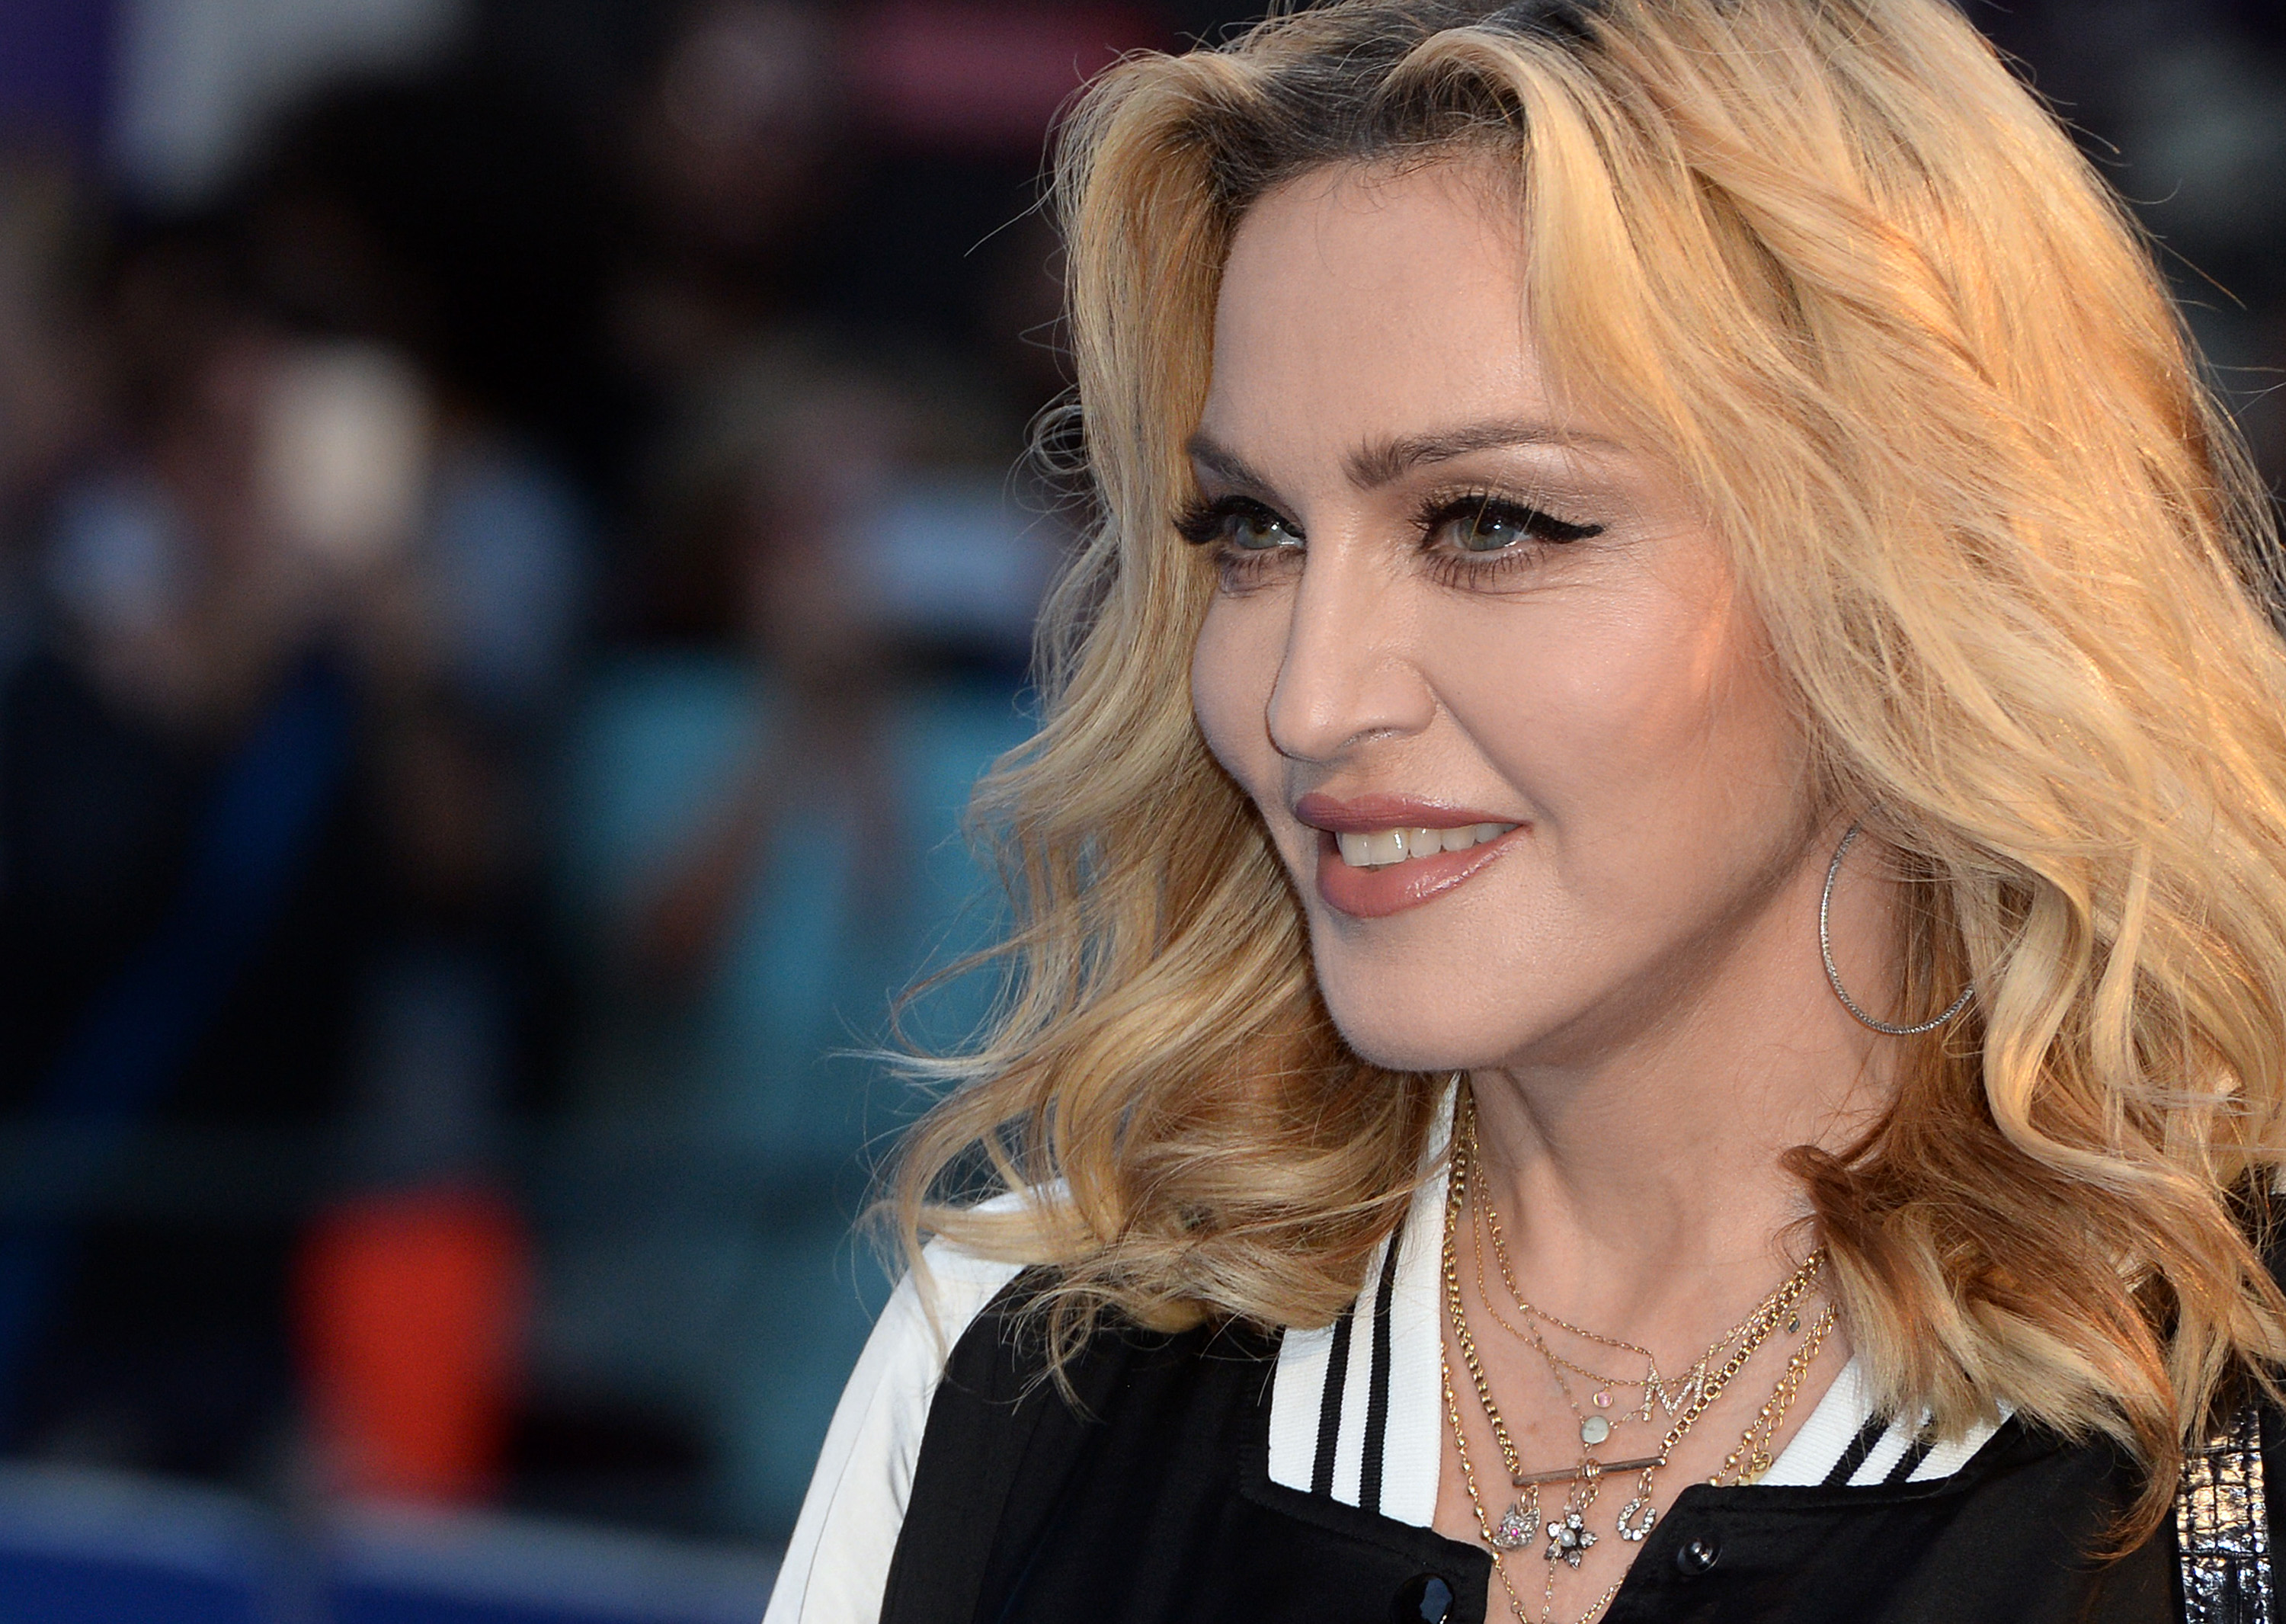 Madonna at the world premiere of "The Beatles: Eight Days A Week - The Touring Years" in London, England on September 15, 2016 | Source: Getty Images